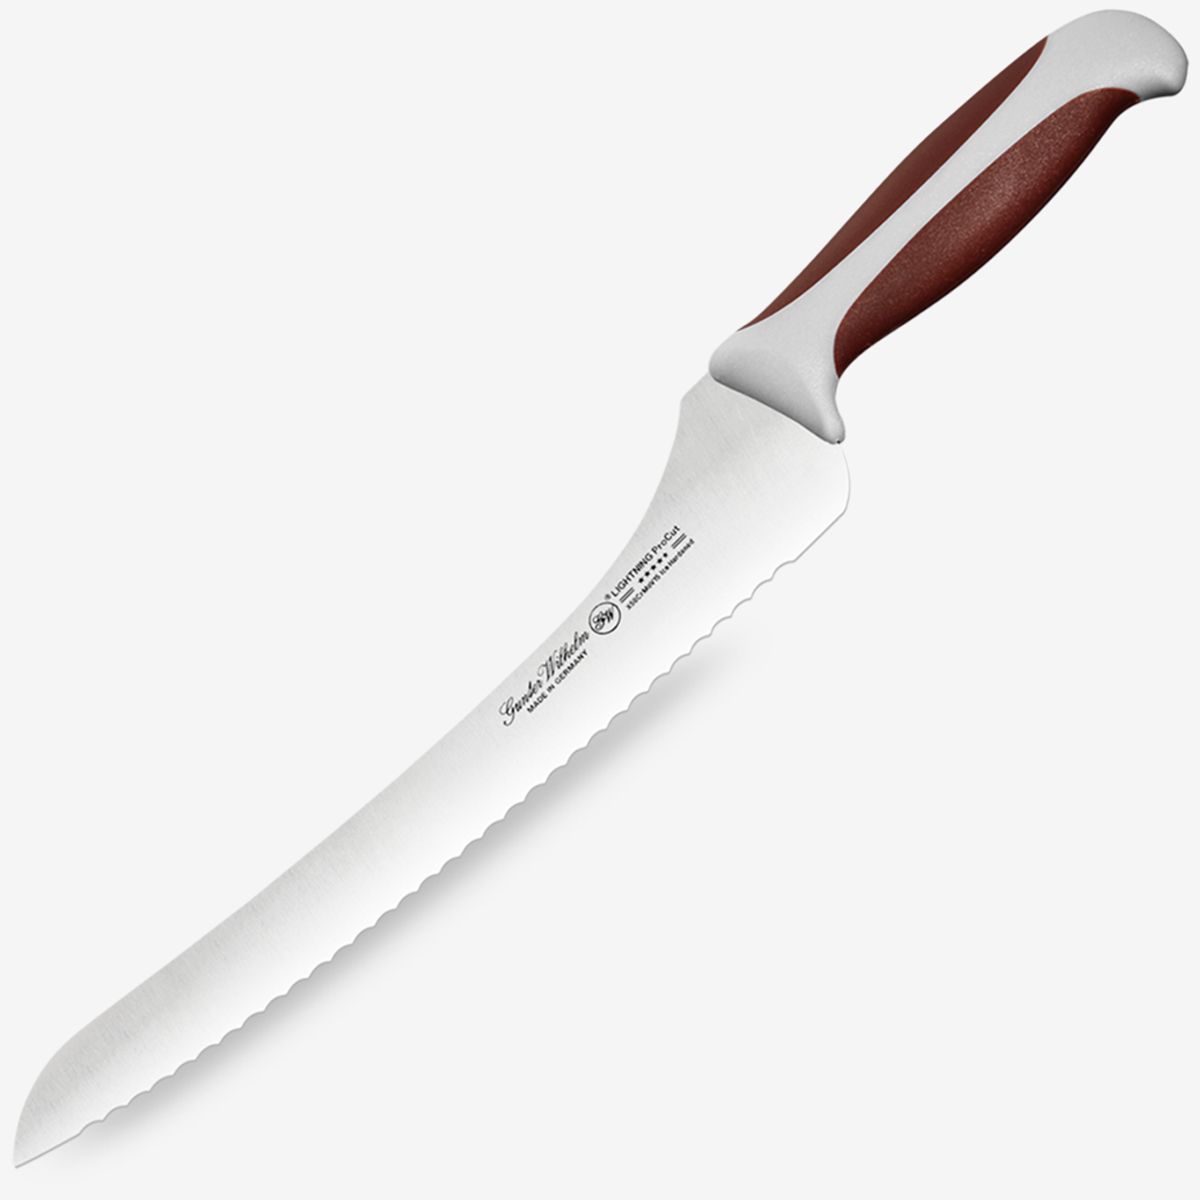 Gunter Wilhelm Thunder Offset Bread Knife, 10 Inch | Brown and Grey ABS Handle SKU: 10-118-1510